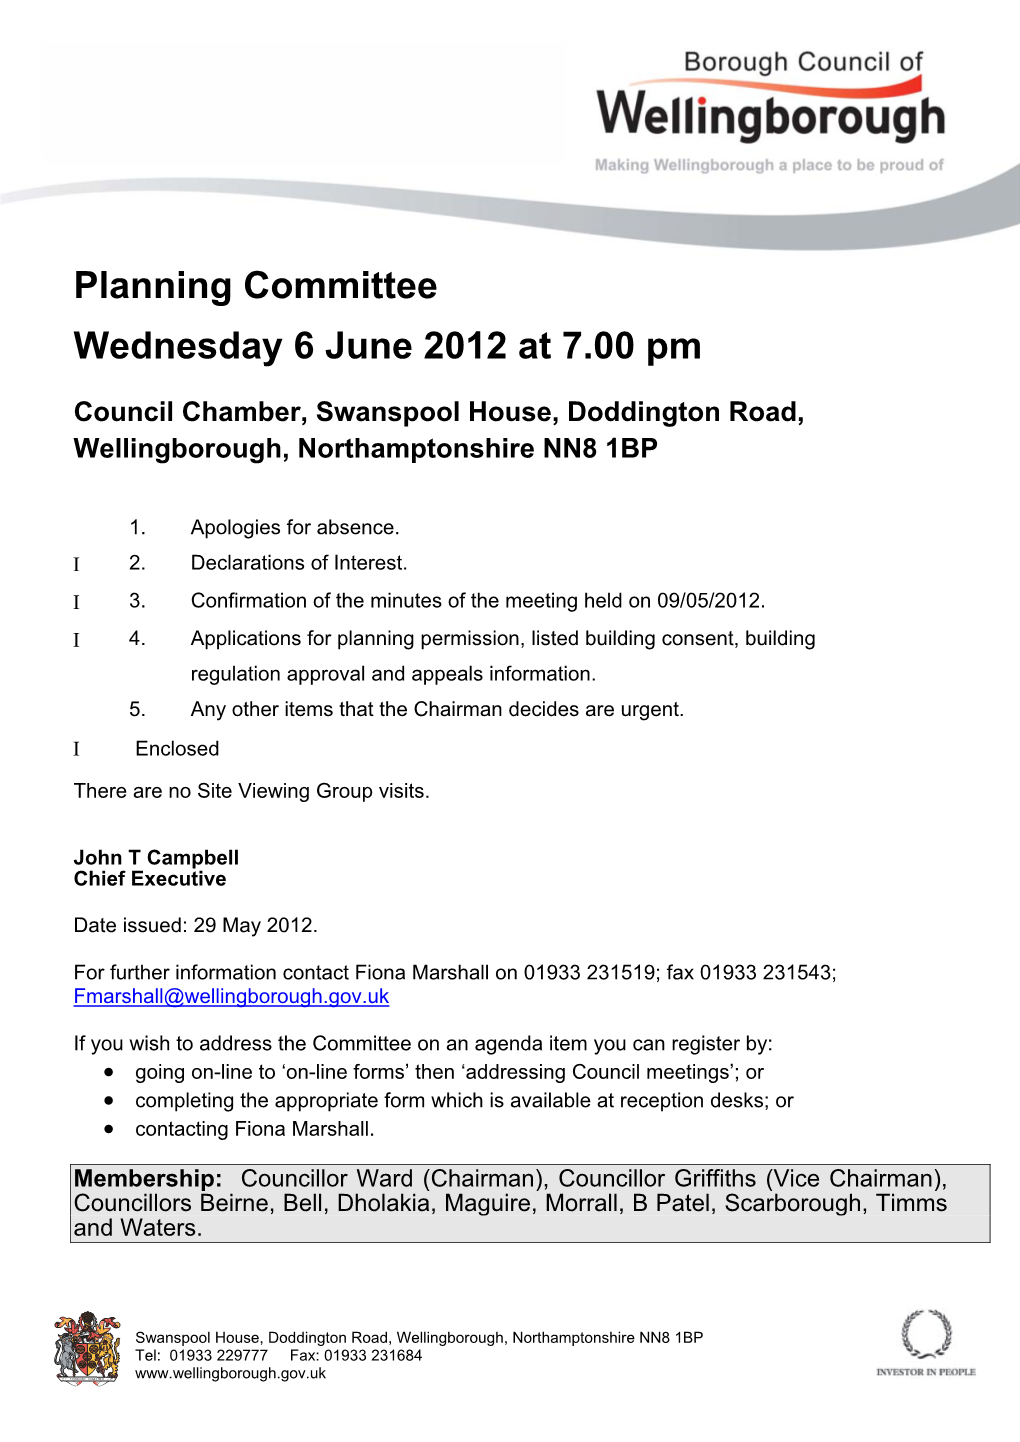 Planning Committee Wednesday 6 June 2012 at 7.00 Pm